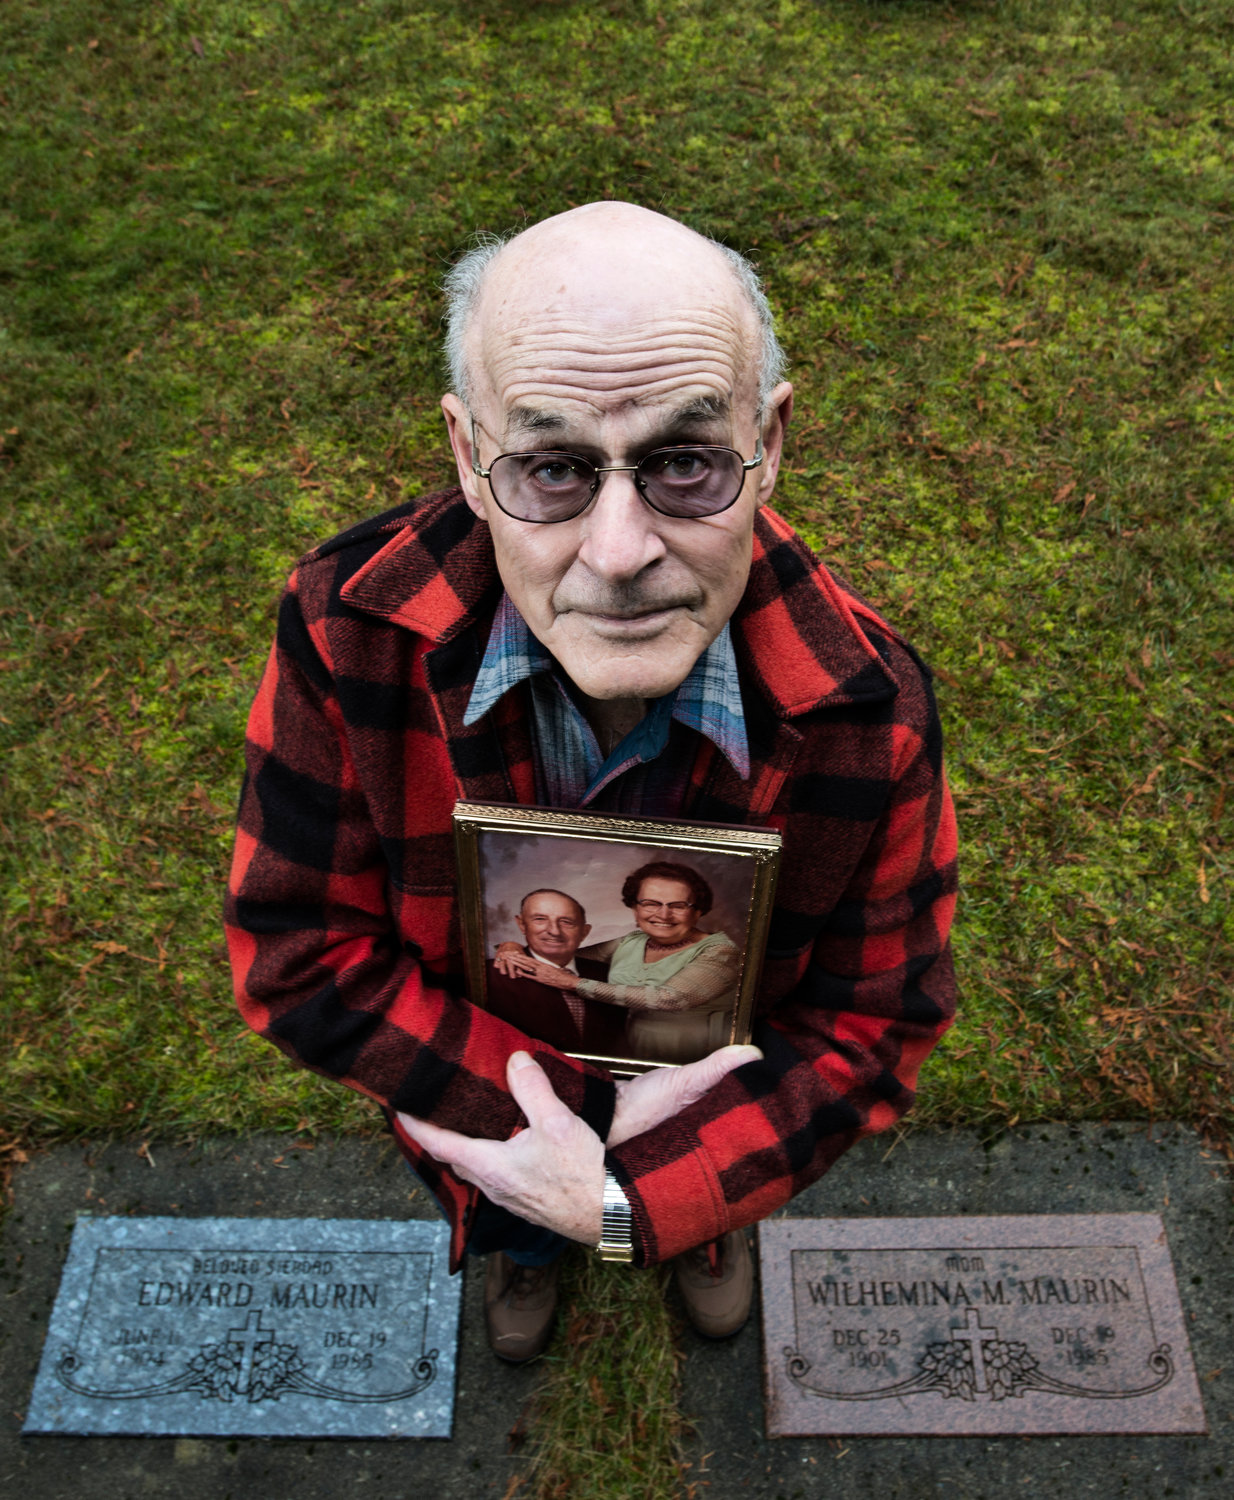 Dennis Hadaller stands next to the graves of his parents, Ed and Minnie Maurin, at the St. Francis Xavier Cemetery in Toledo in this 2013 Chronicle file photo. Hadaller, a former Lewis County commissioner, spent over 25 years searching for an answer to his parents’ deaths.